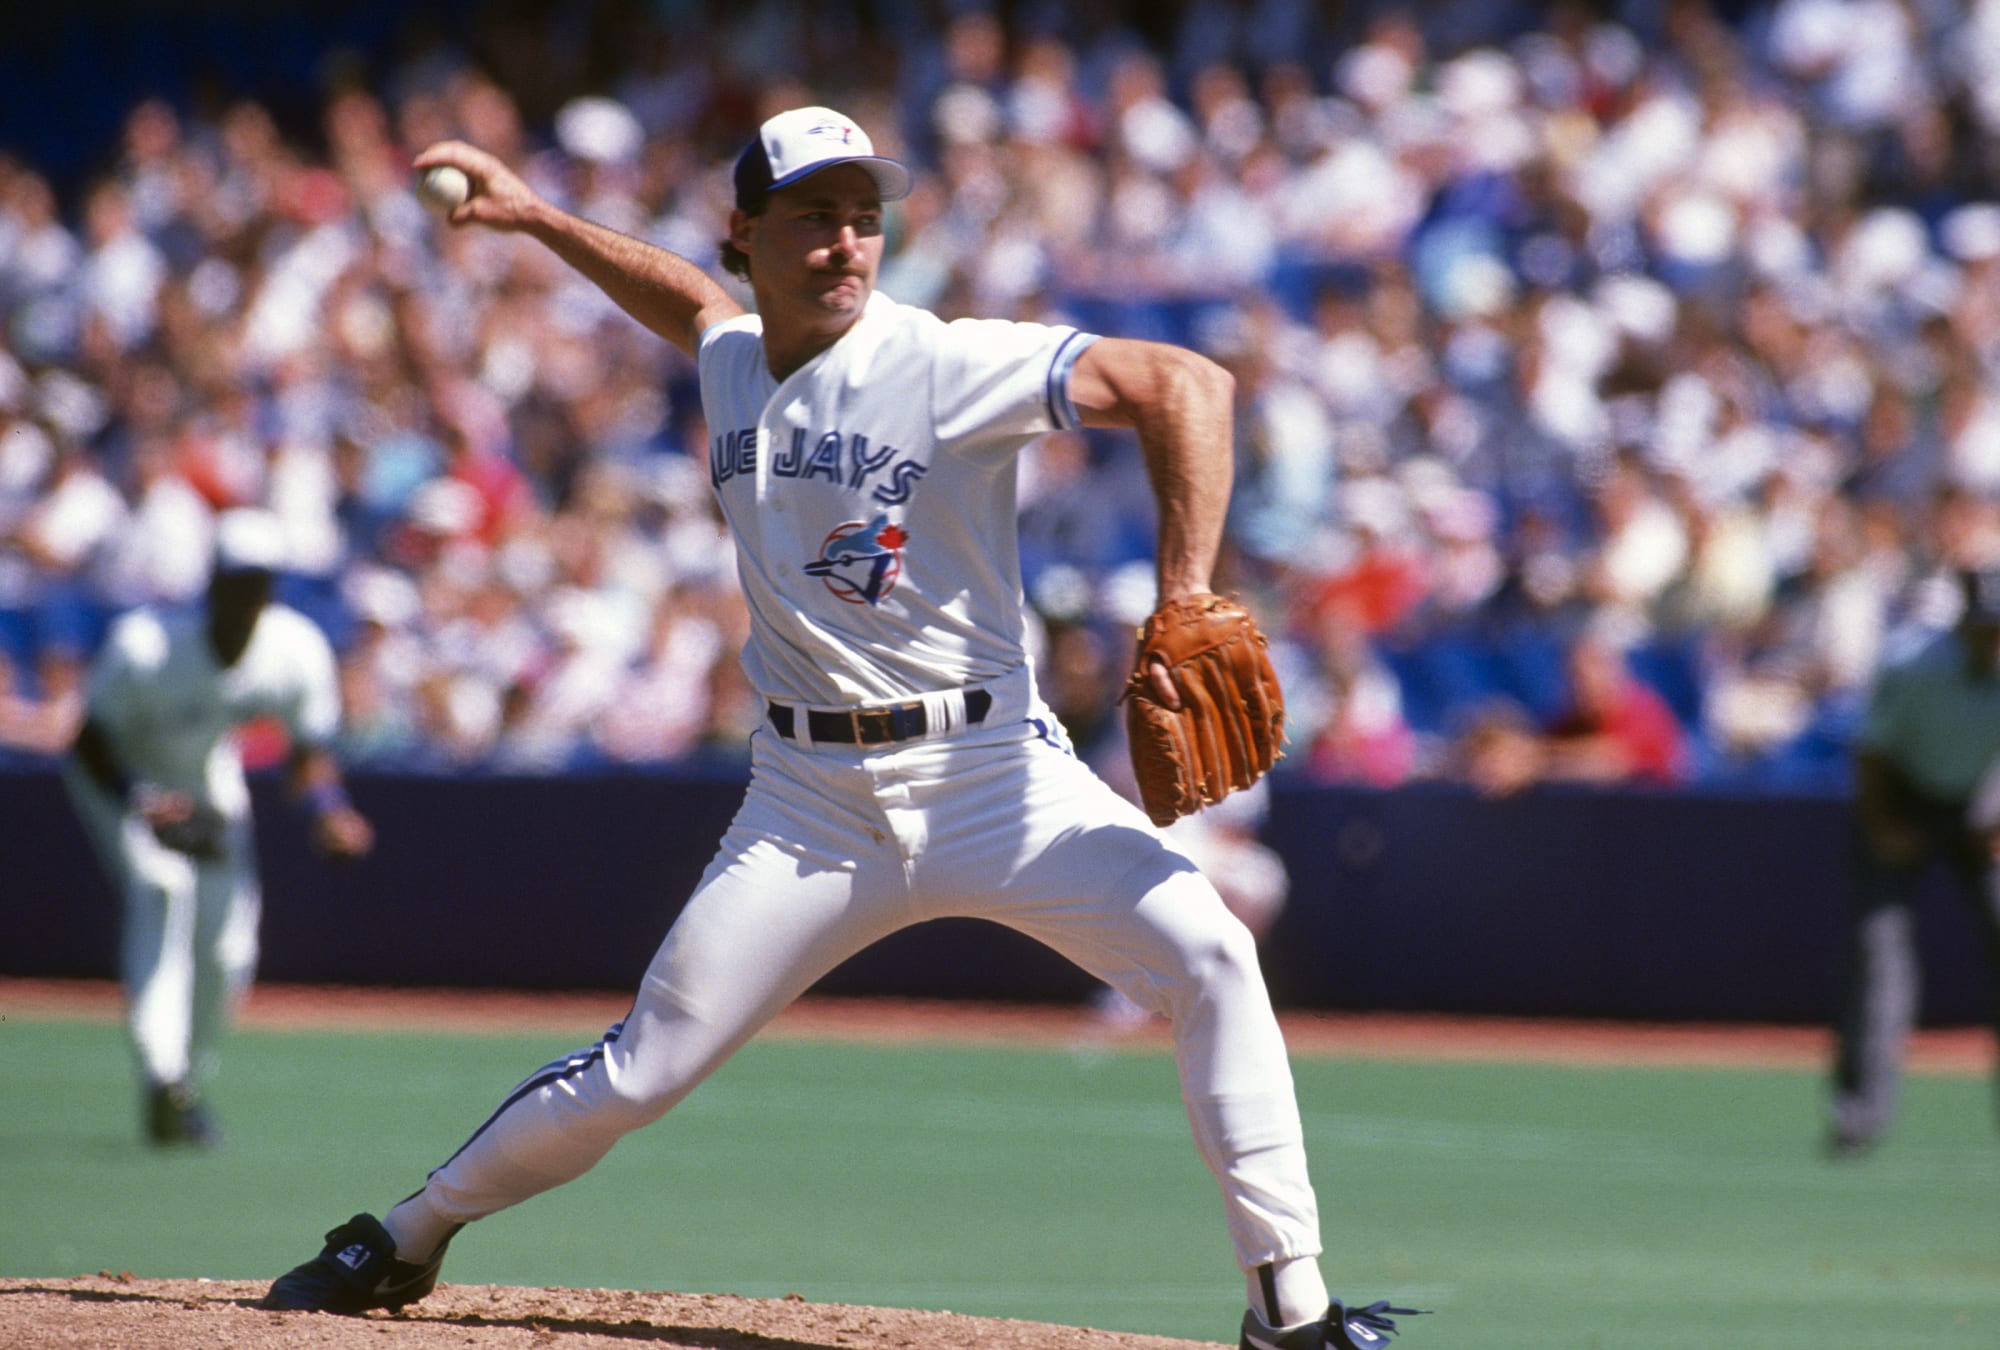 Blue Jays: The story of Dave Stieb's improbable MLB comeback